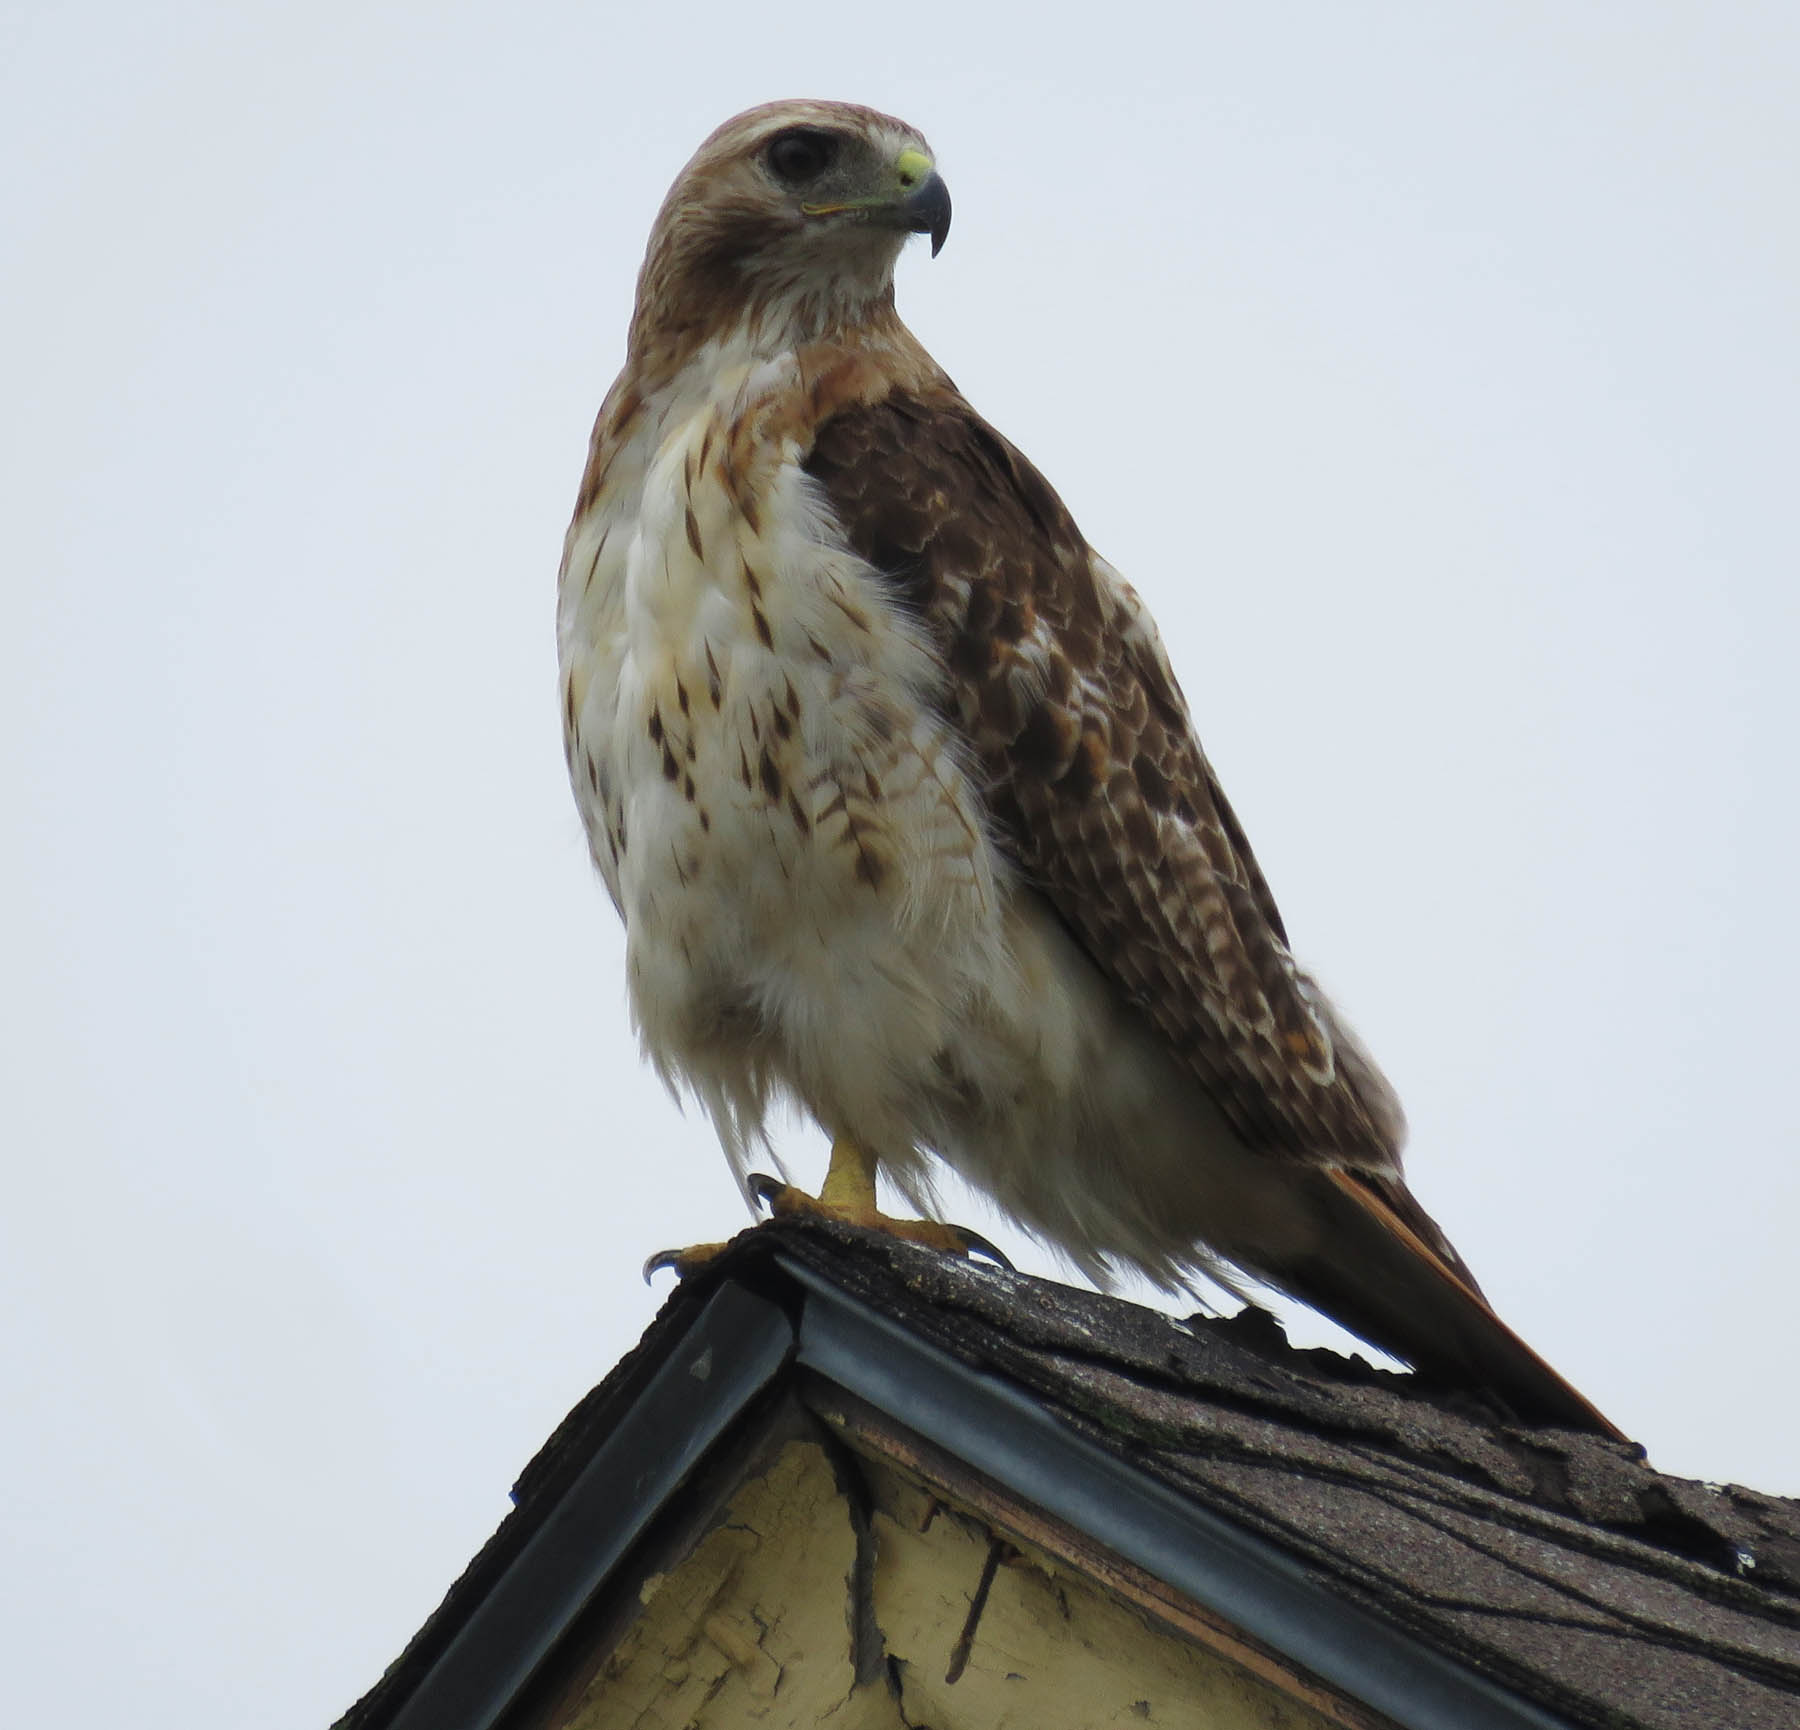 Hawk watching over Toy Town